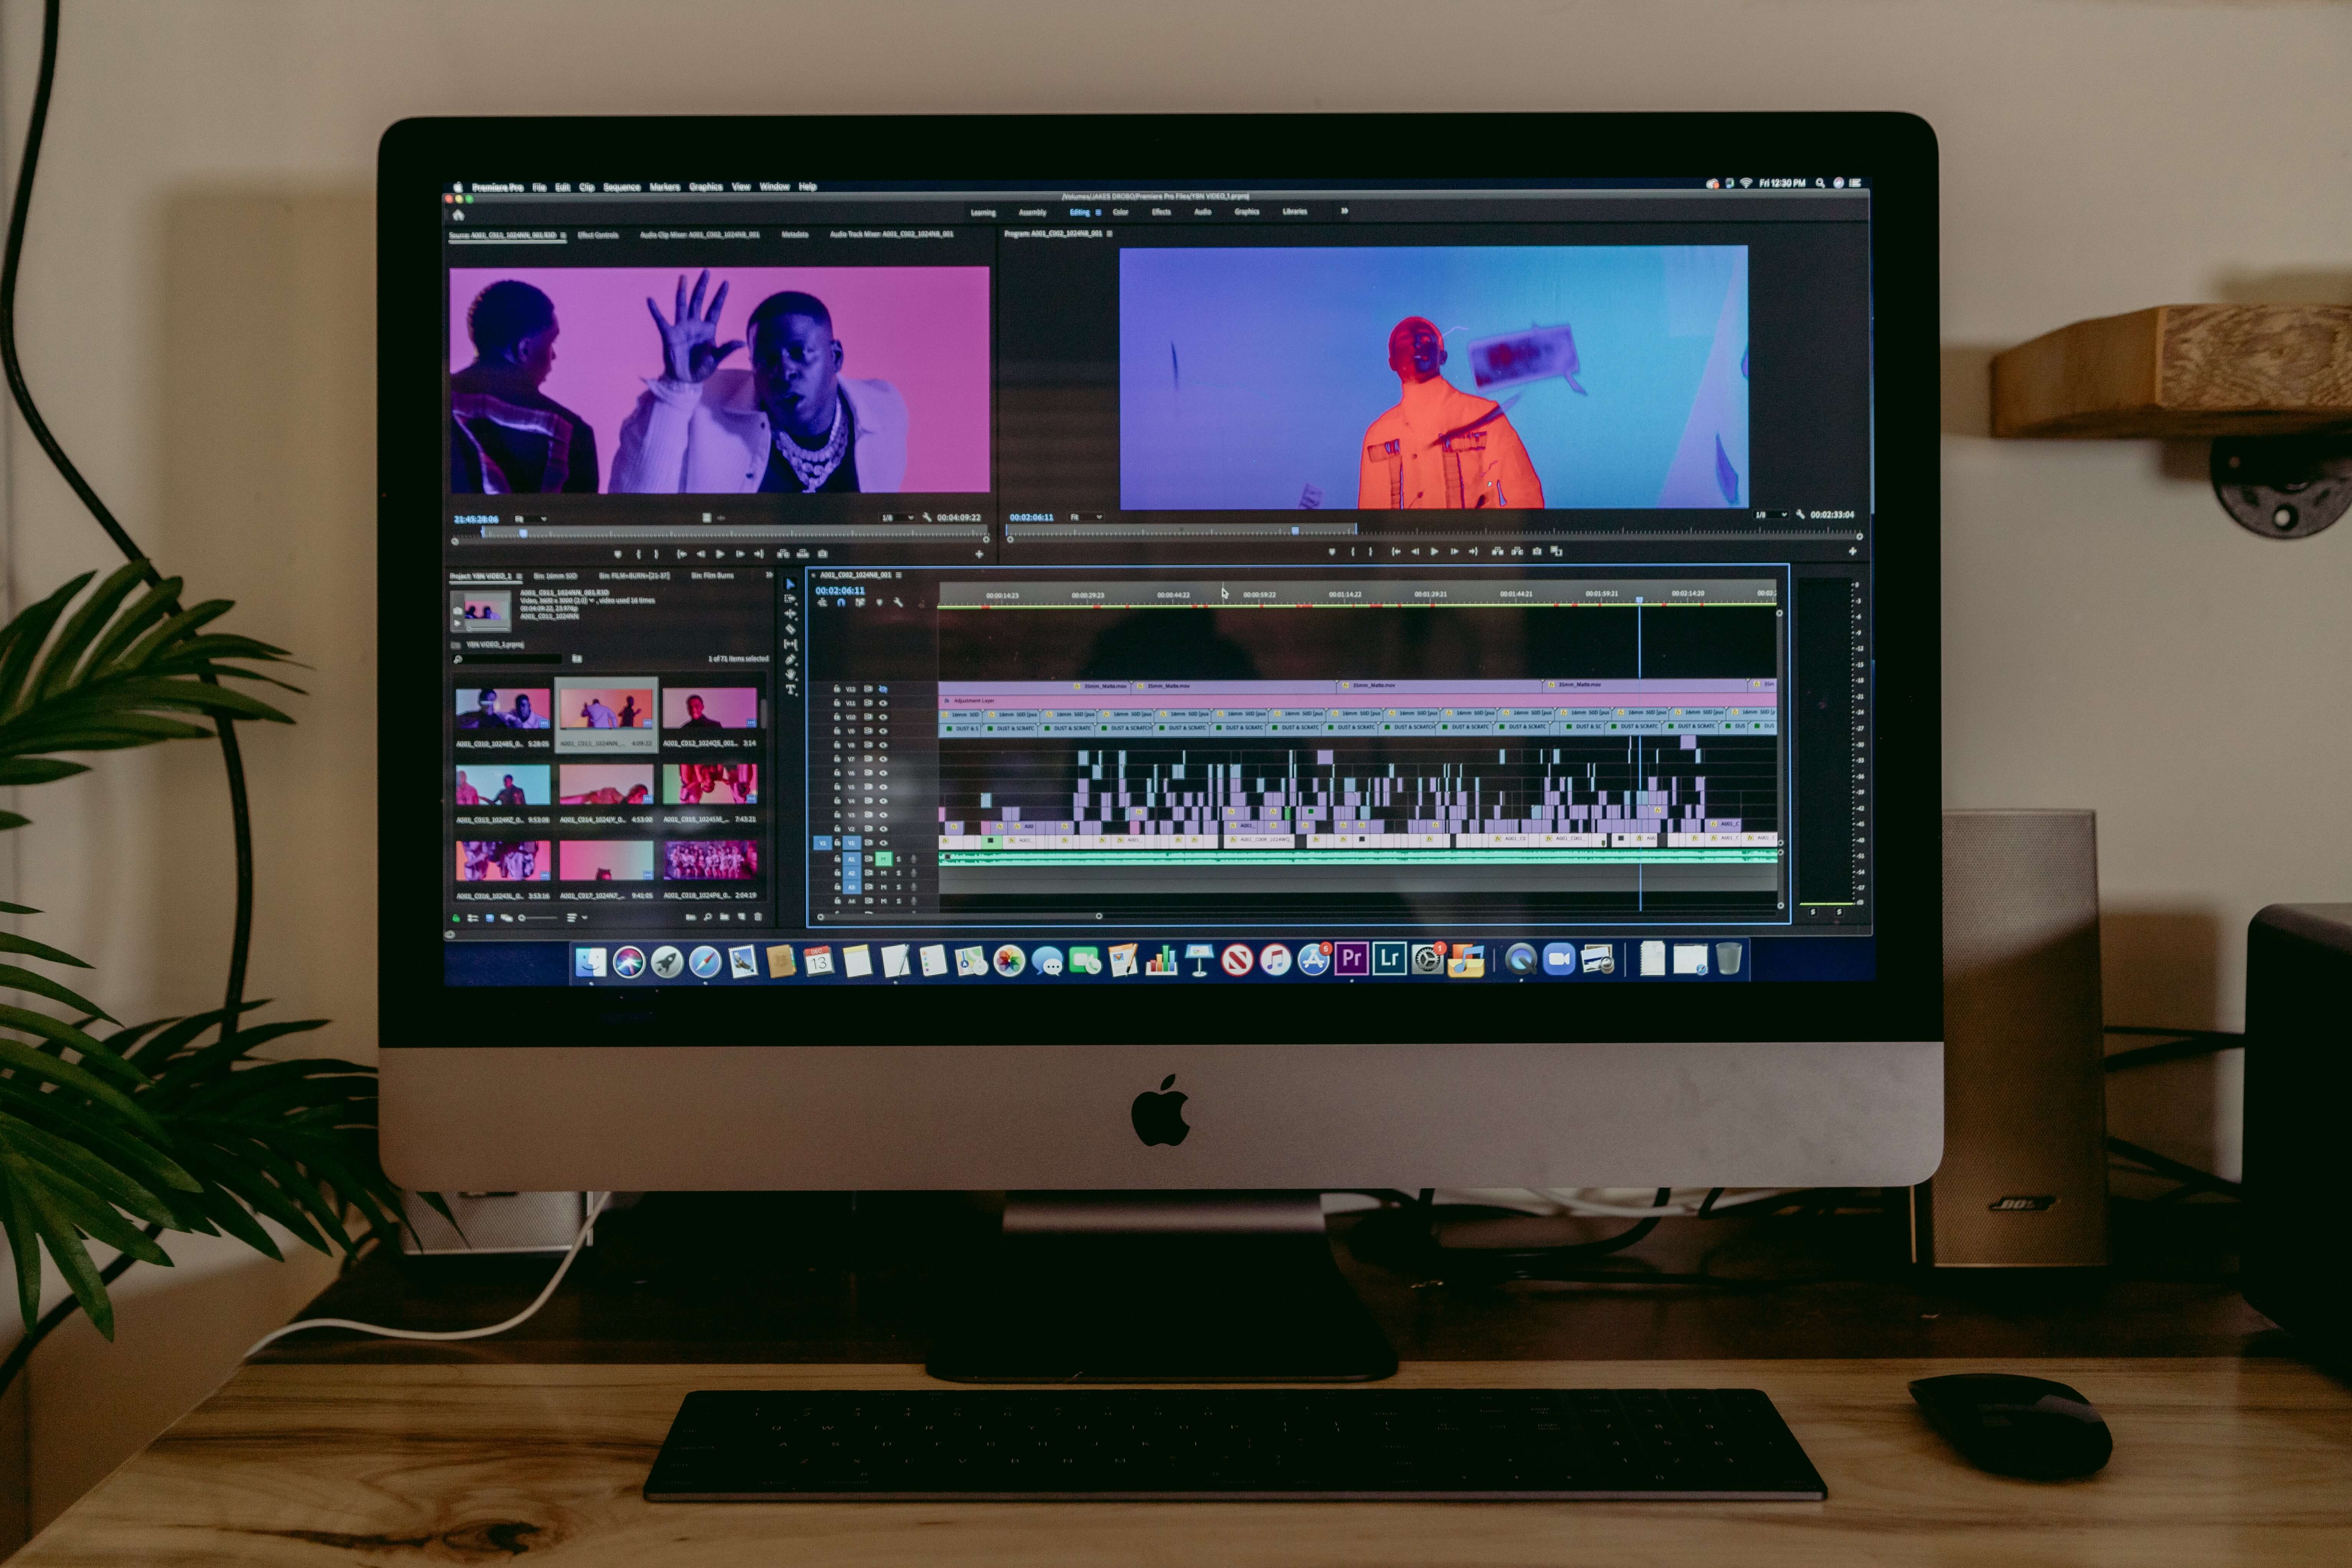 A video editing software open on a Mac